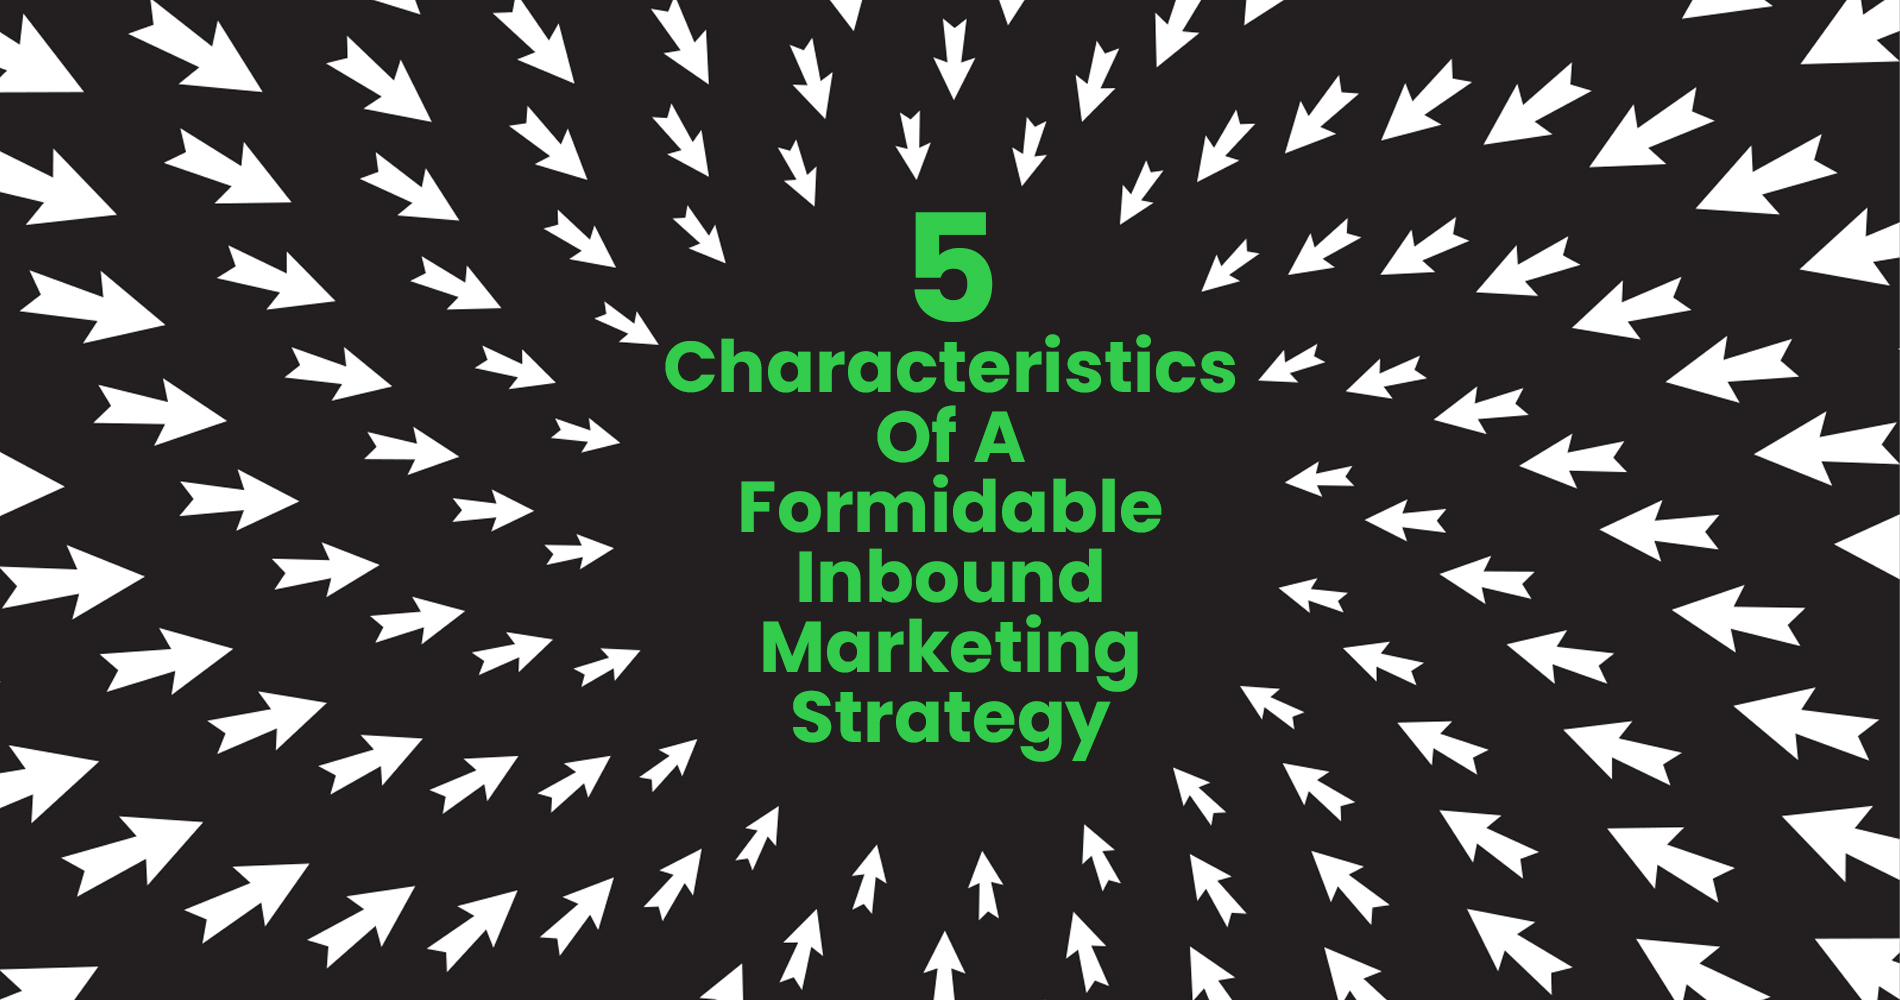 5 Characteristics Of A Formidable Inbound Marketing Strategy